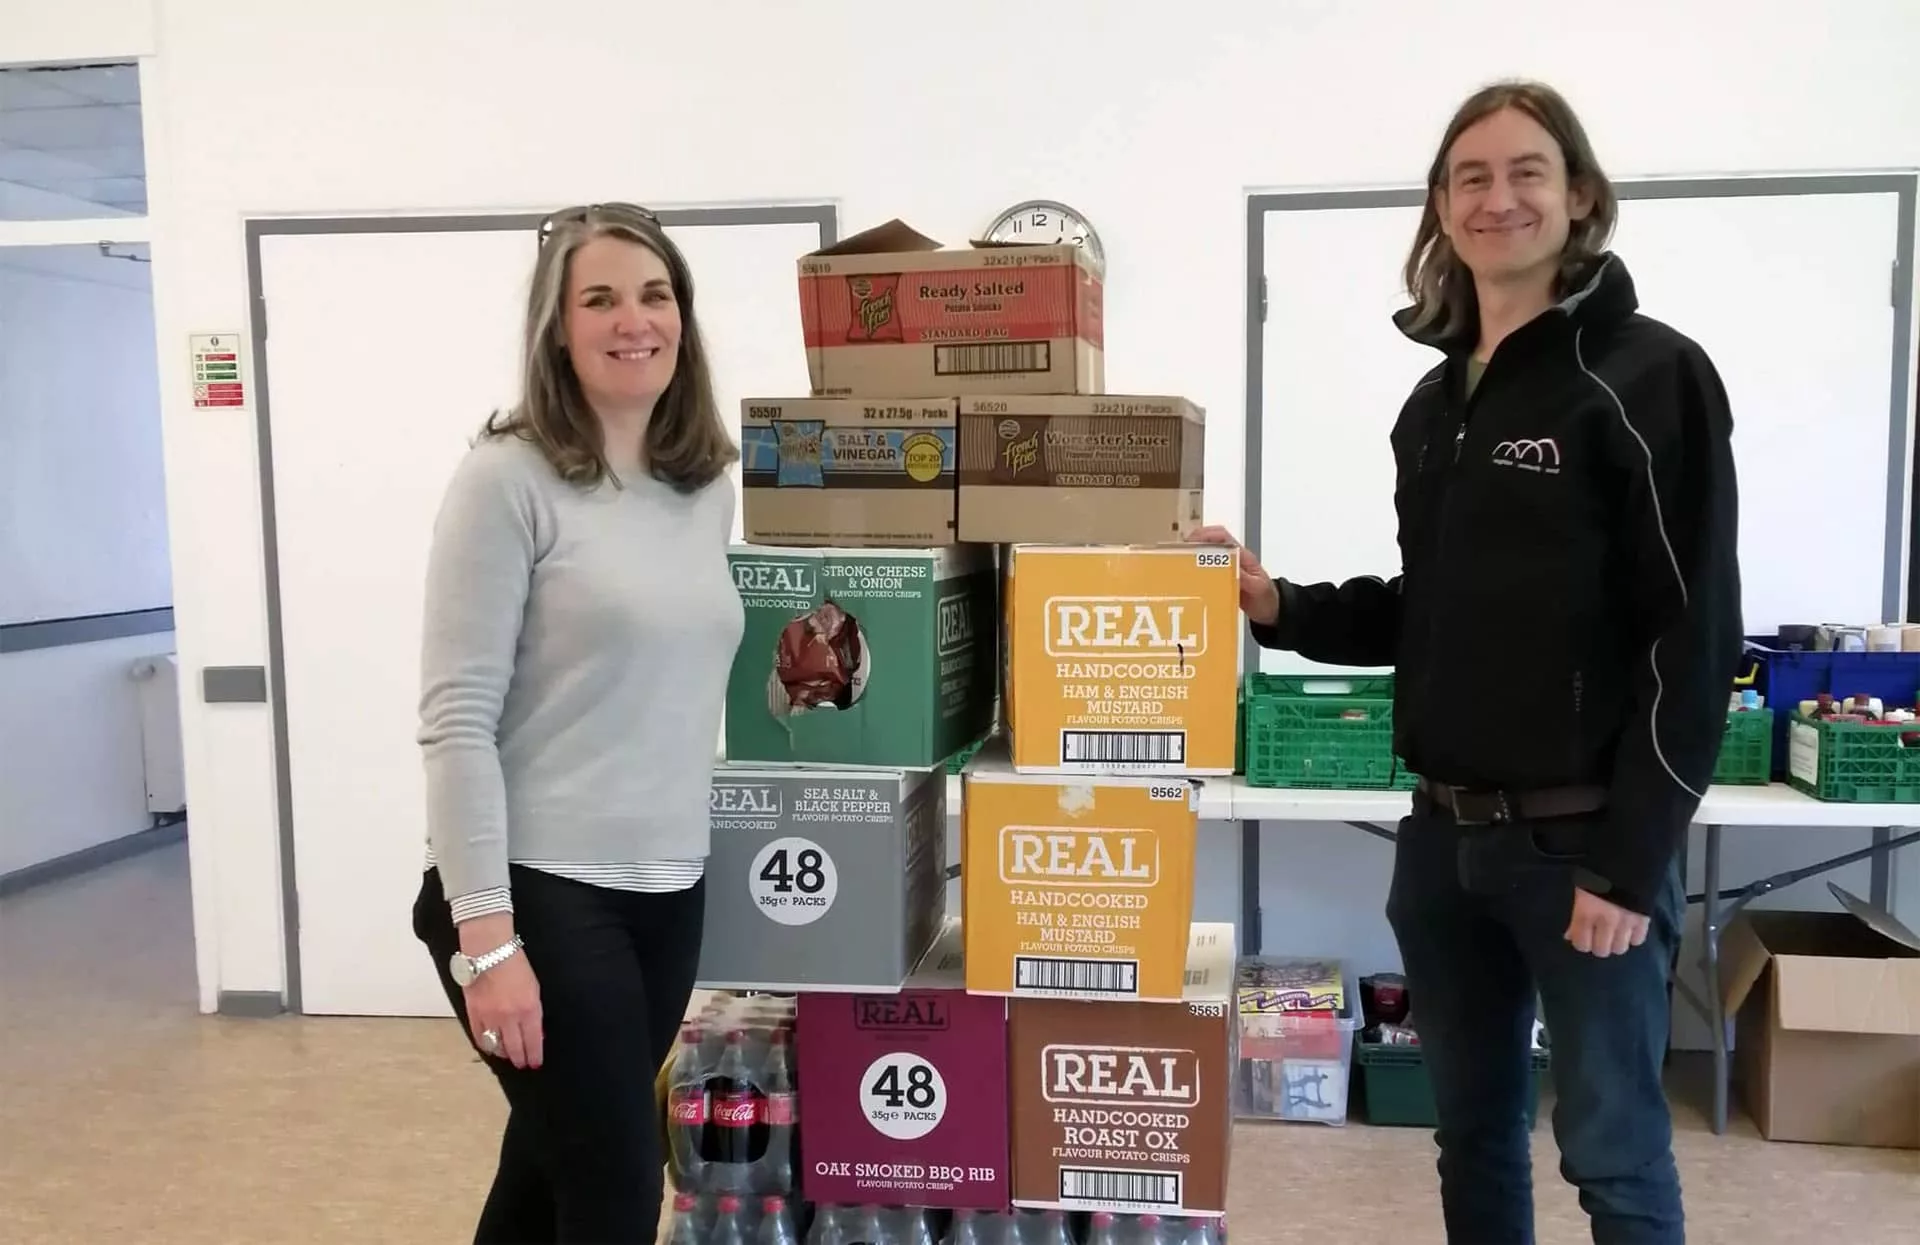 MK College donates food to Woughton Community Council’s VE Day celebrations